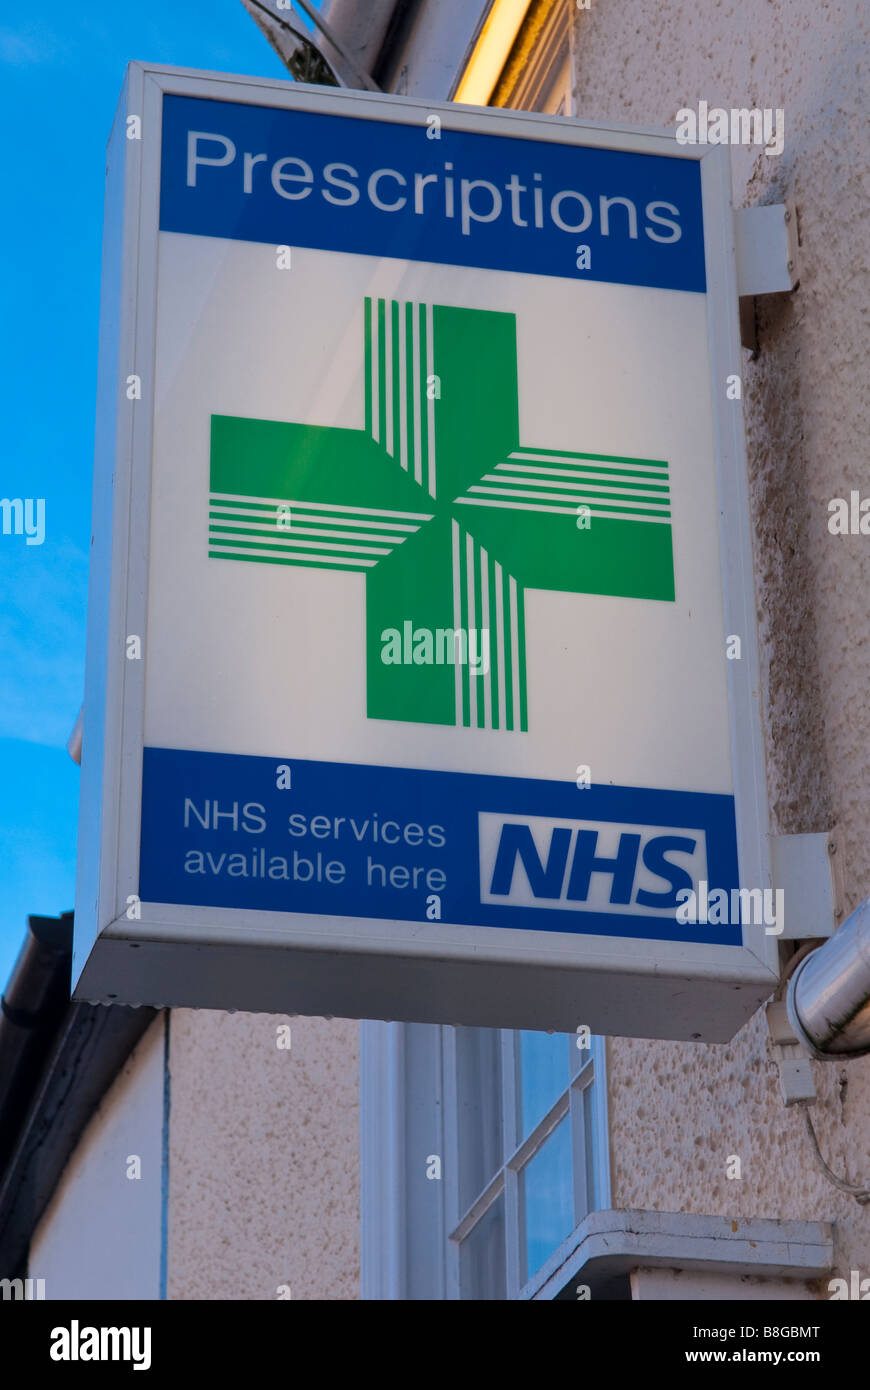 A sign outside a uk pharmacy advertising prescriptions and nhs services available here Stock Photo